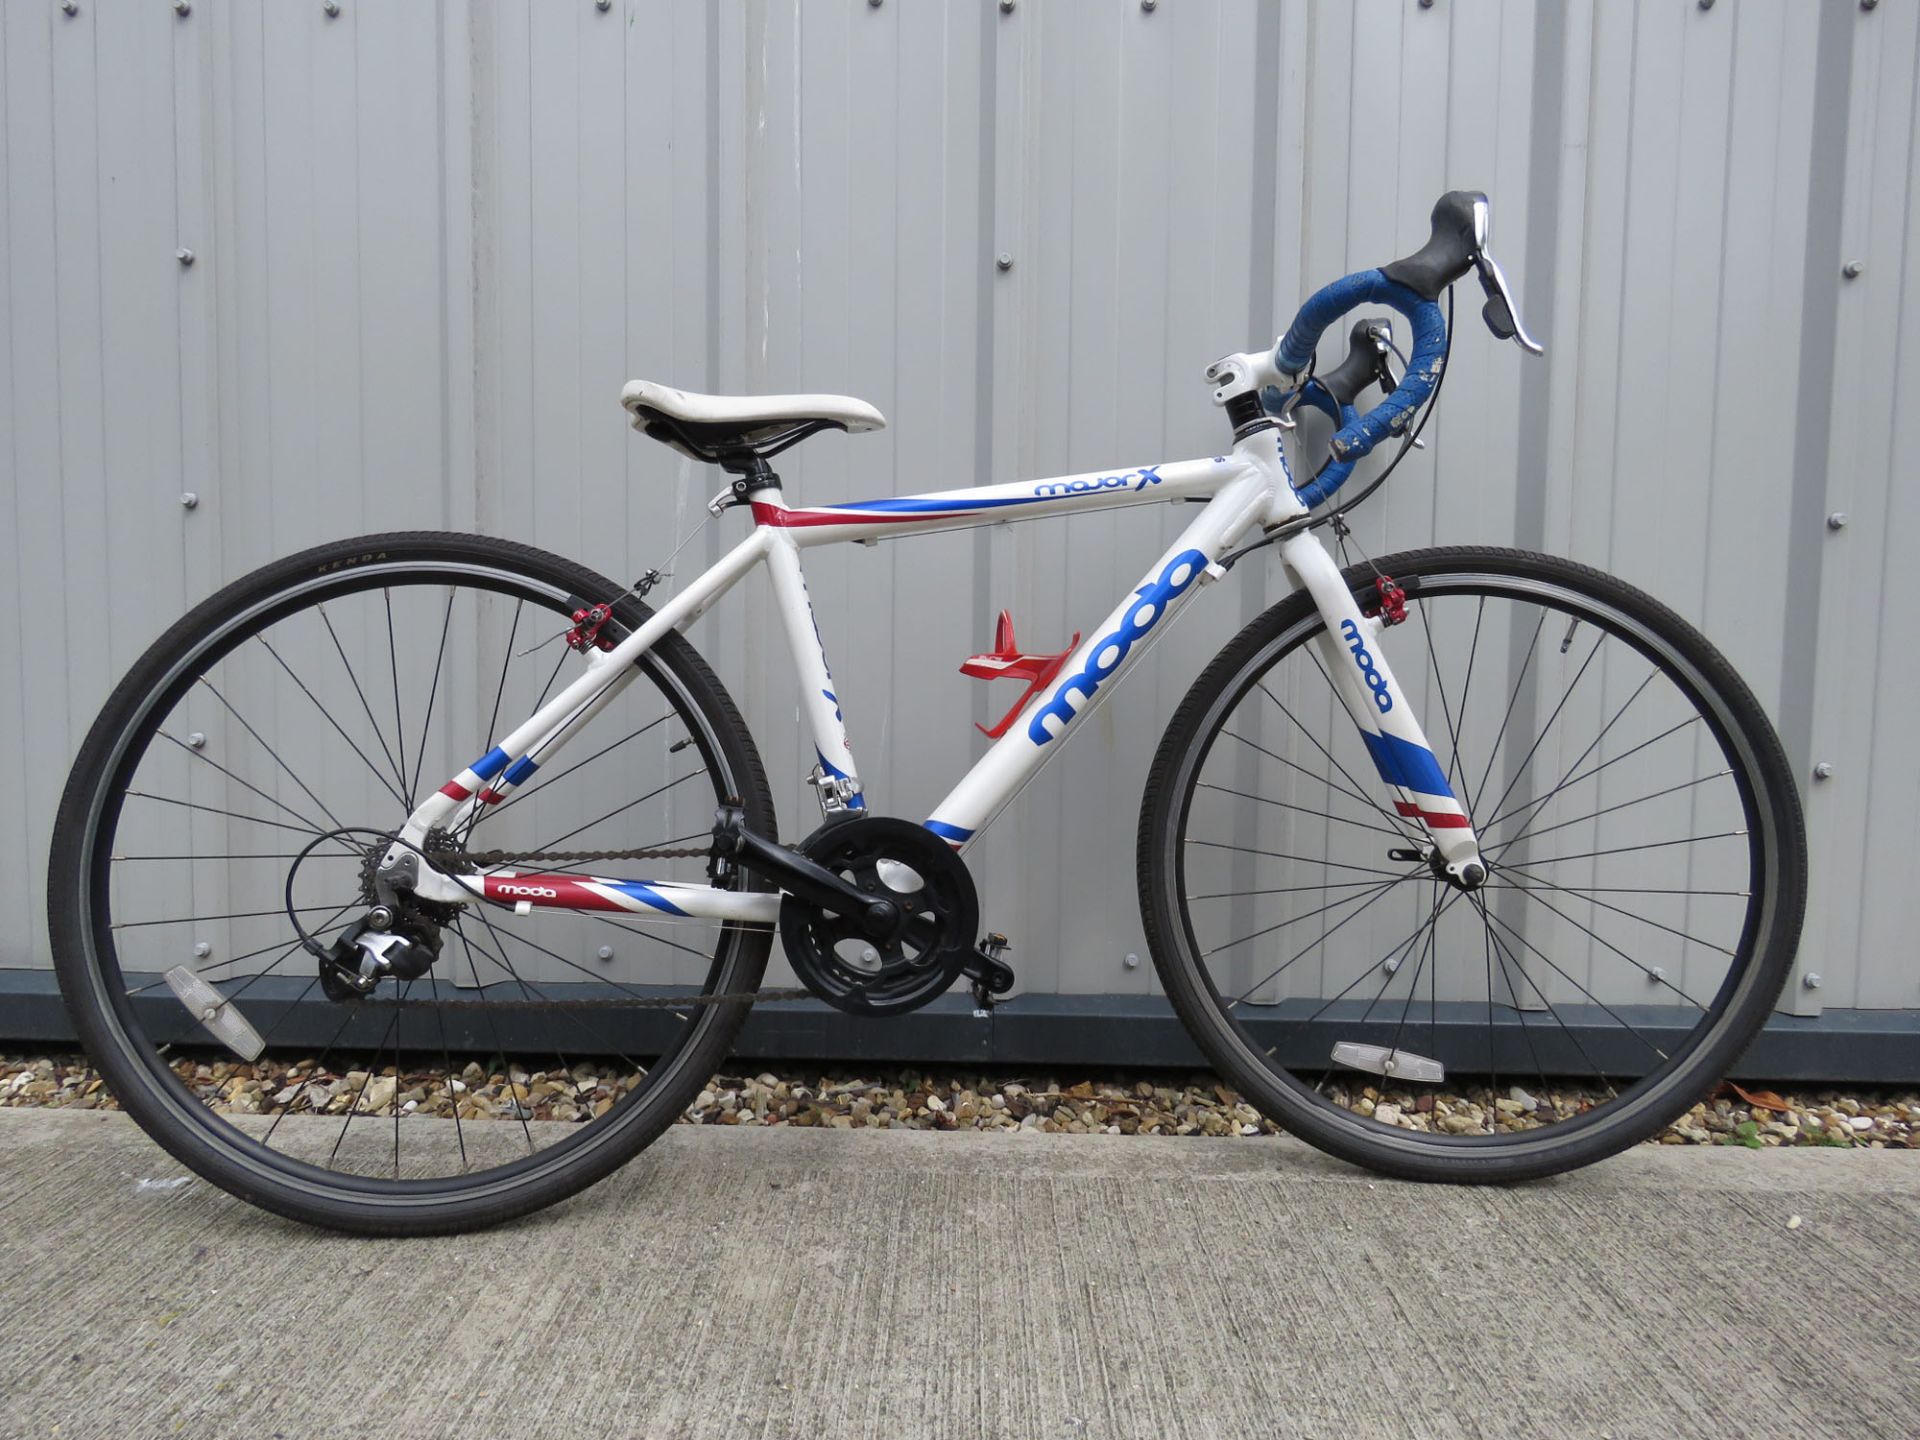 Major X racing bike in white and blue